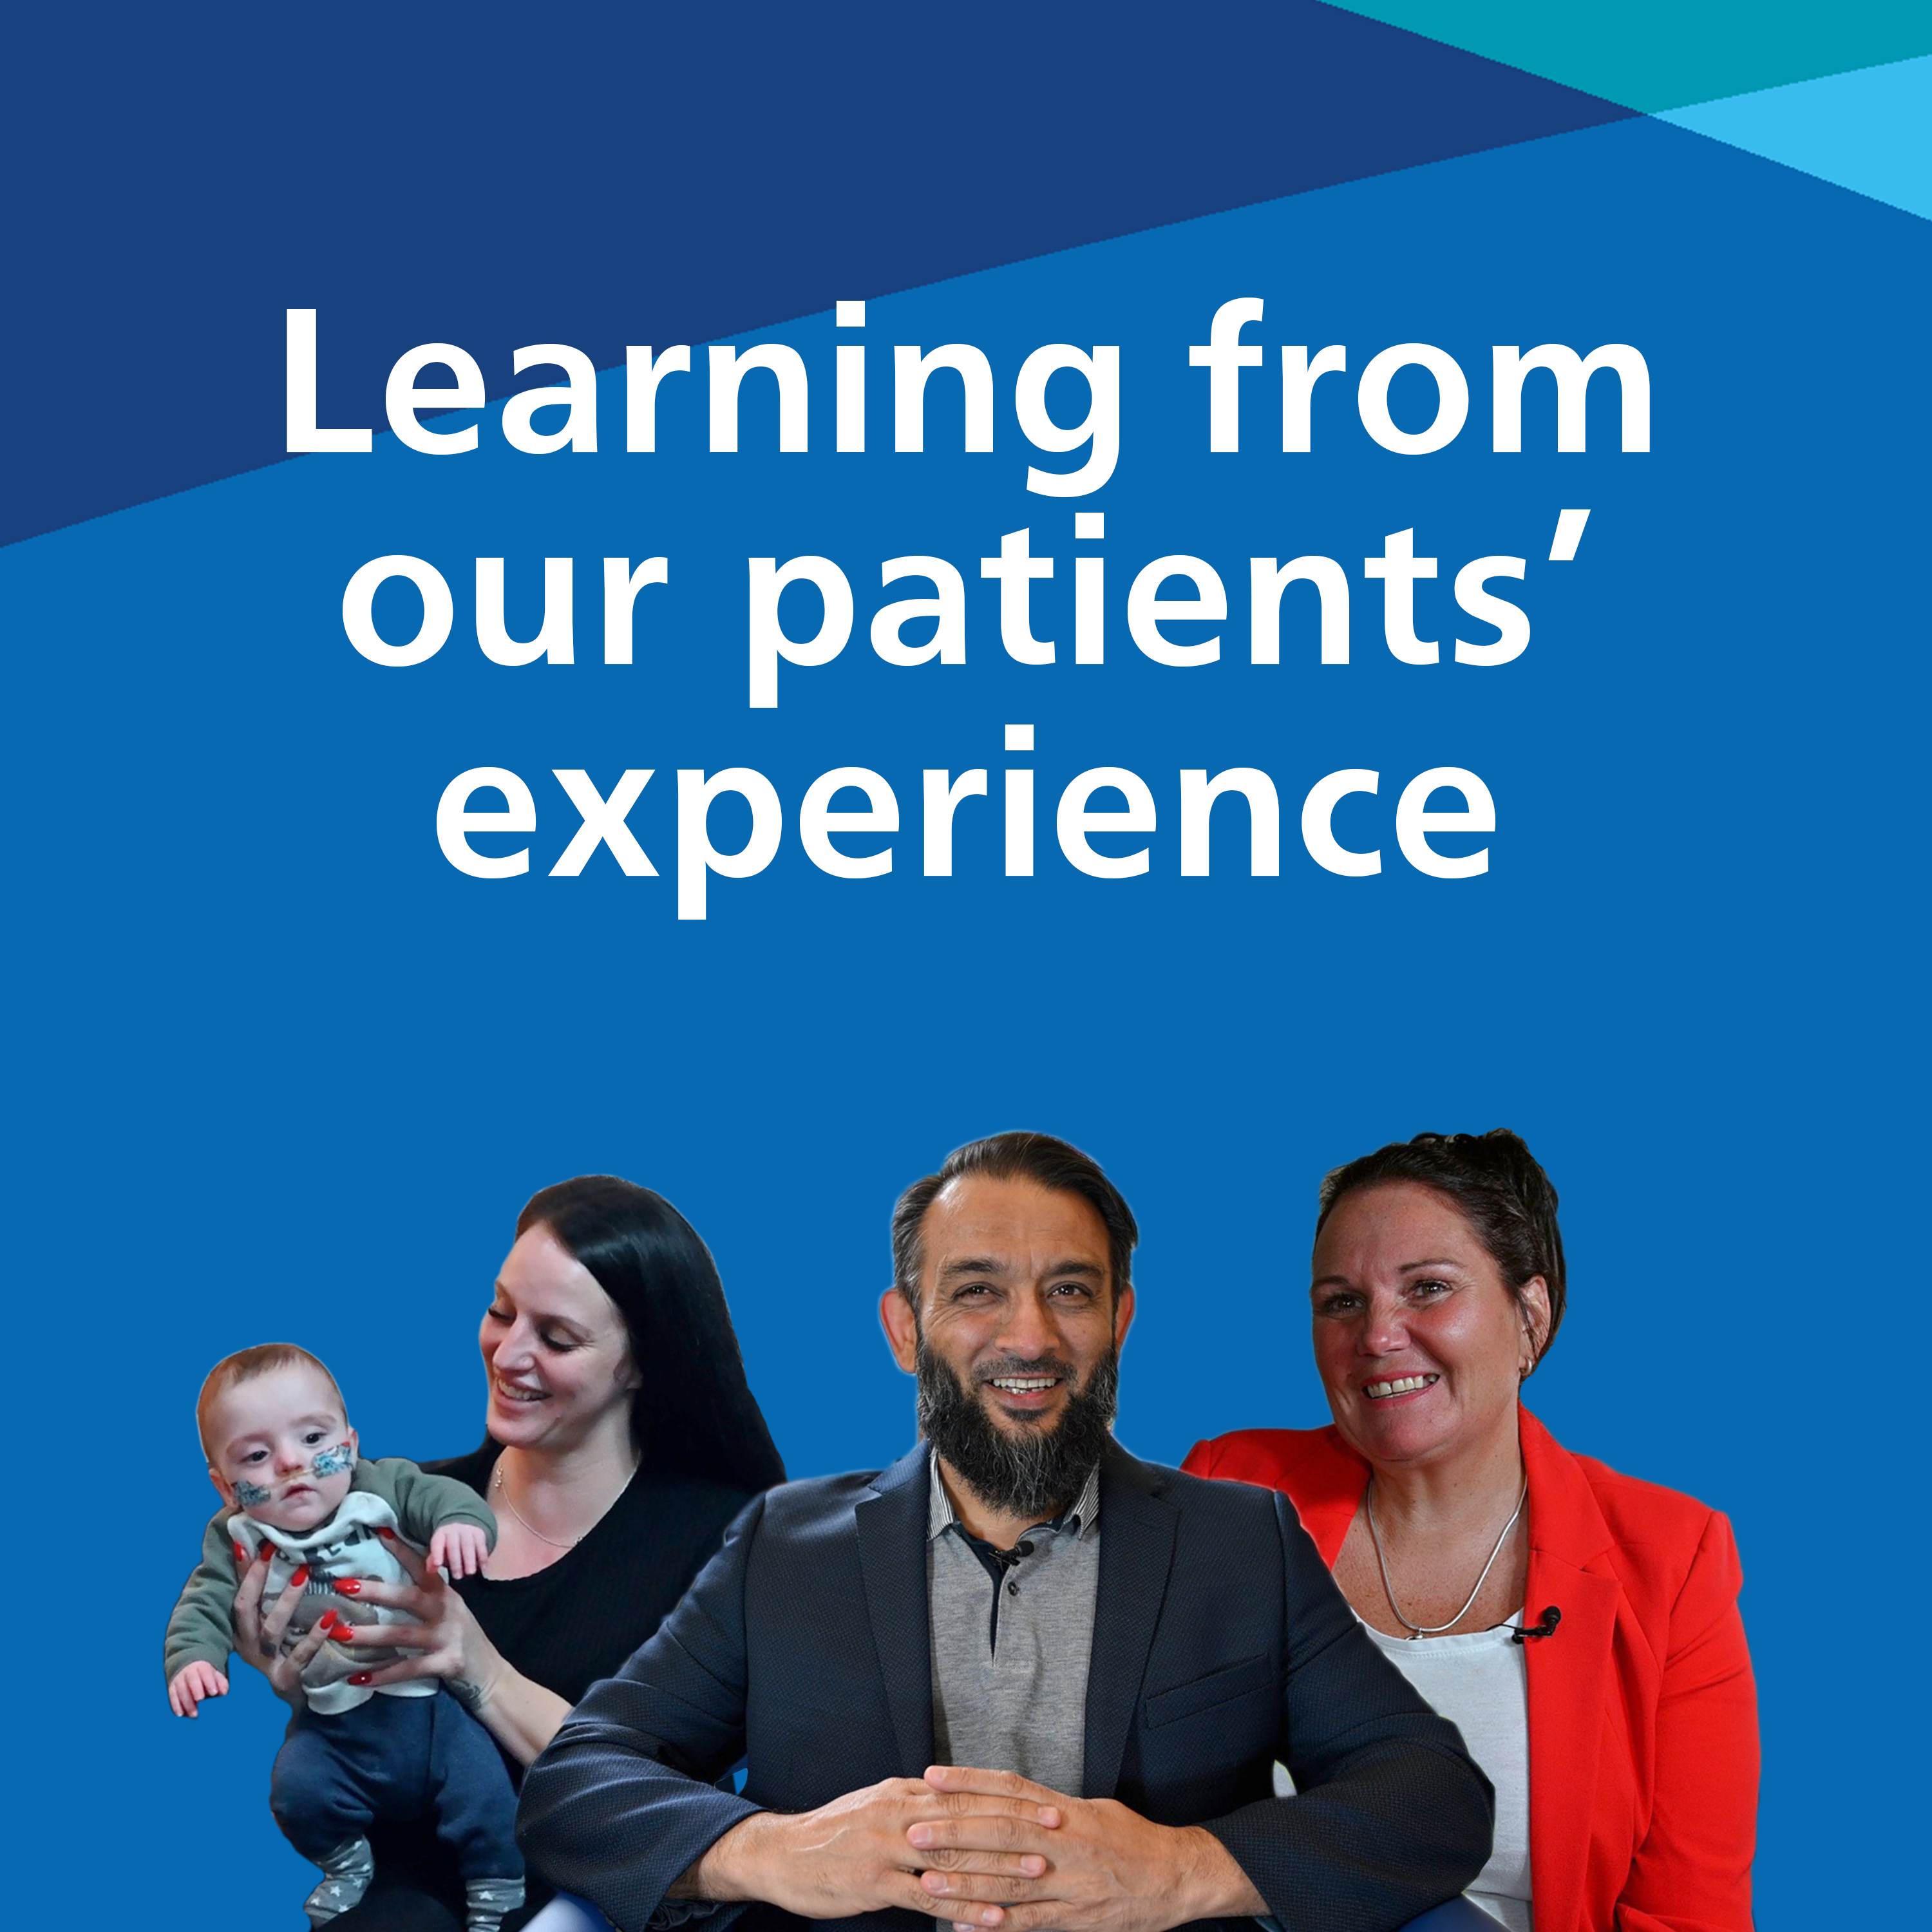 Montage image showing a woman and her baby, a man and a woman with text saying learning from our patients' experience